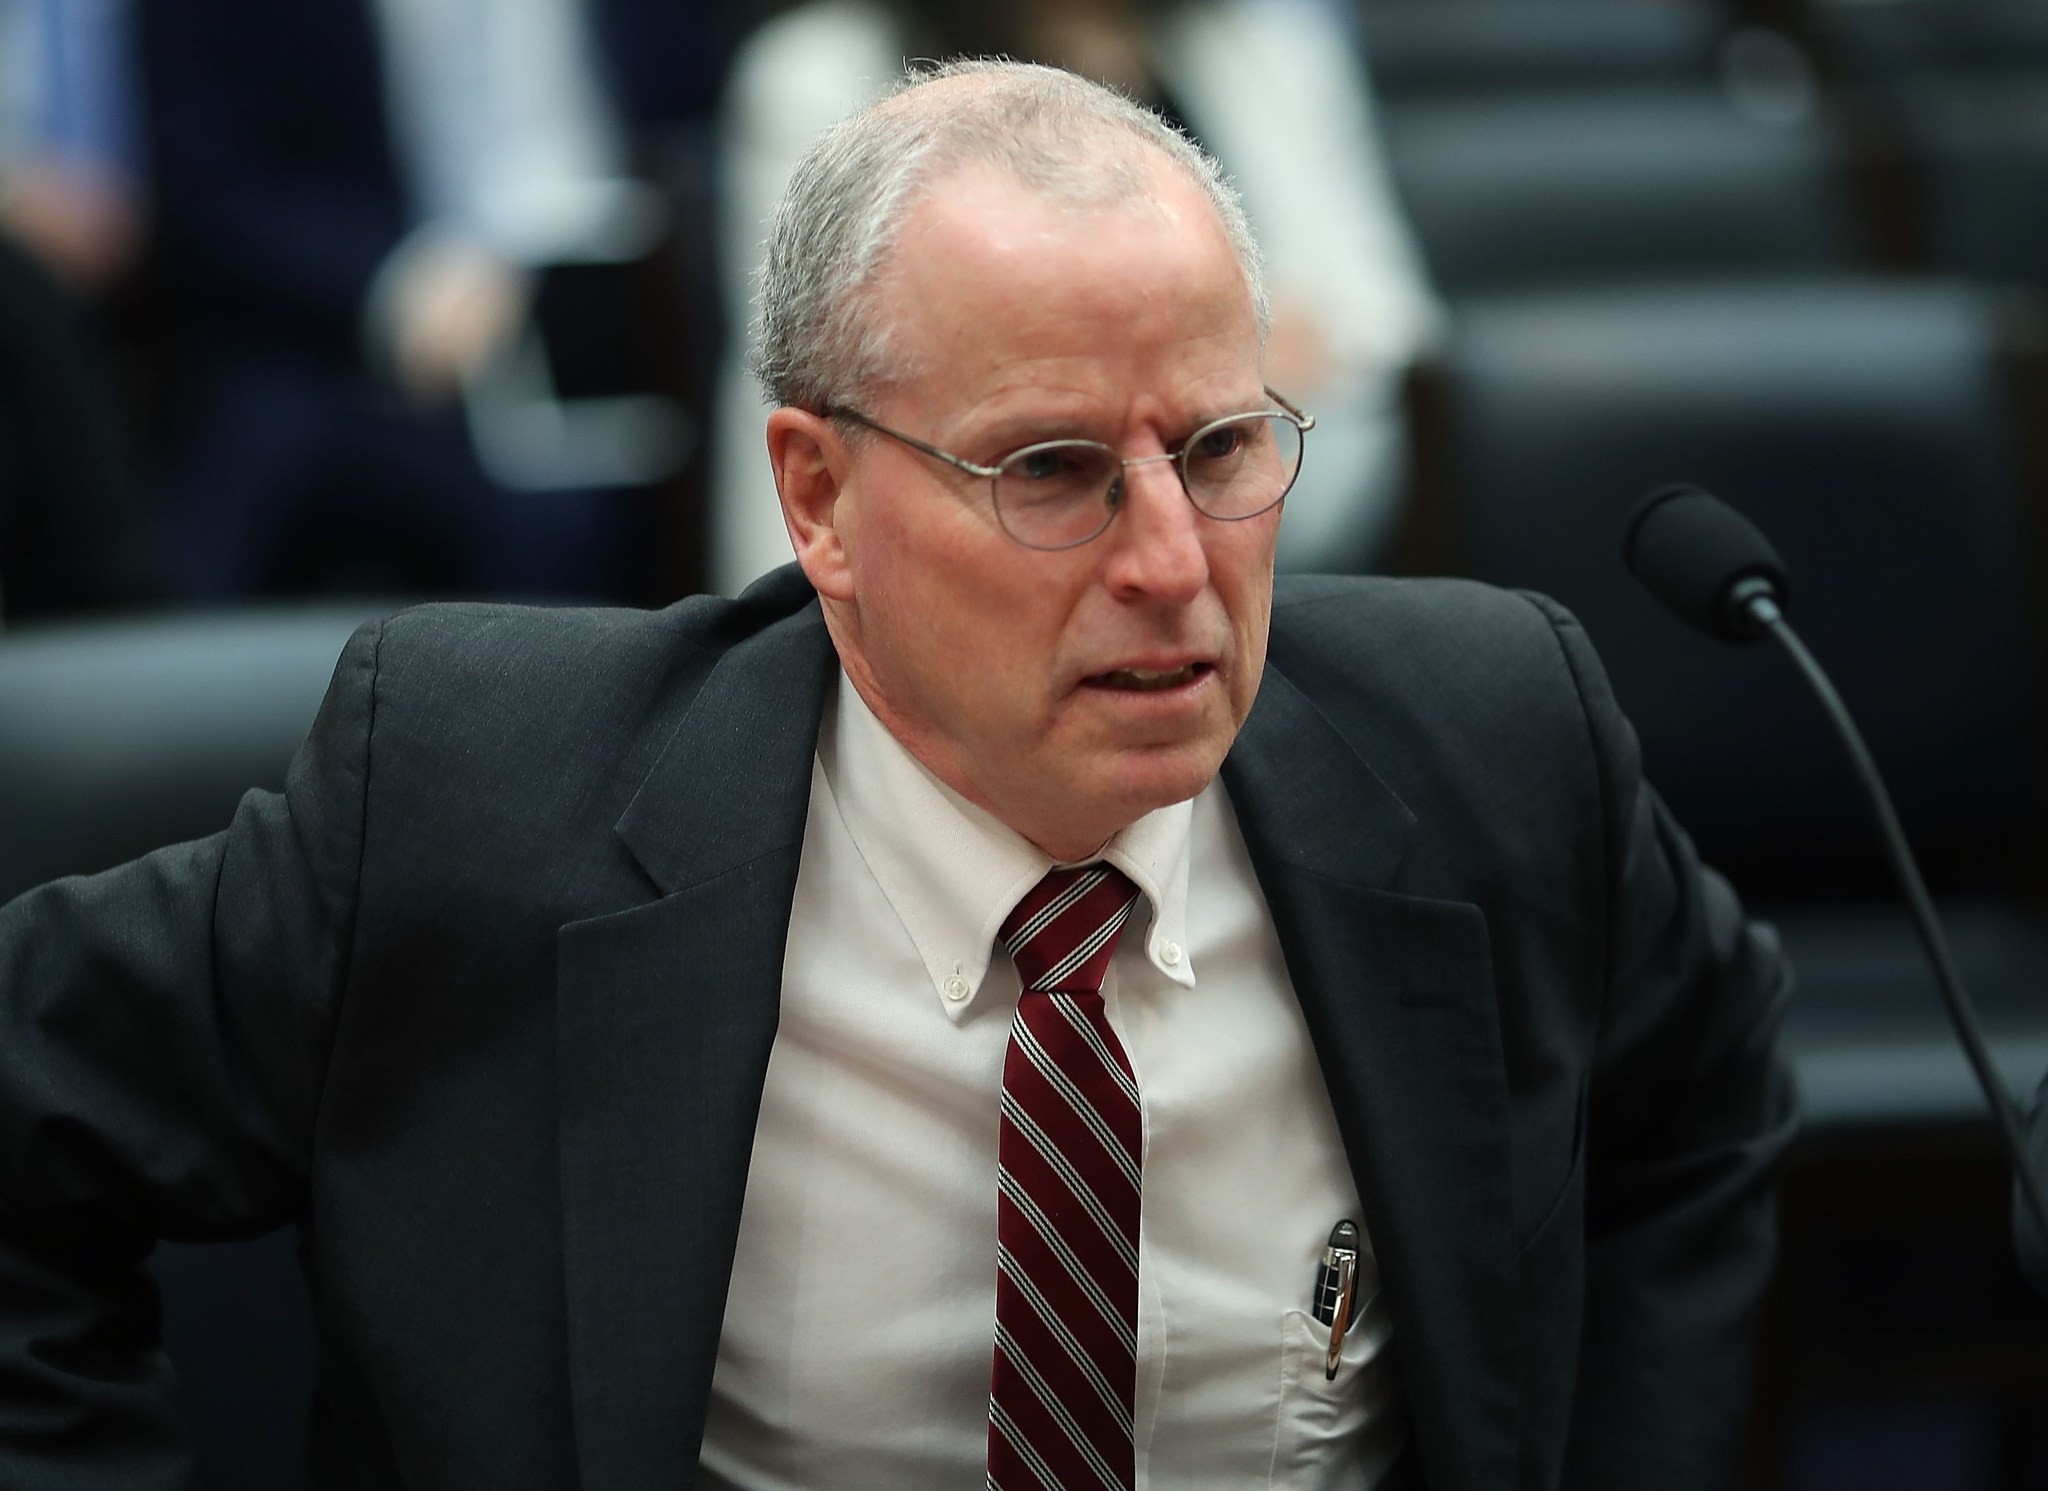 Robert Ford, former U.S. Ambassador to Syria, speaks about Syria's future, during a House Foreign Affairs Committee hearing on Capitol Hill, Feb. 6, 2018 in Washington, DC.  (AFP Photo)